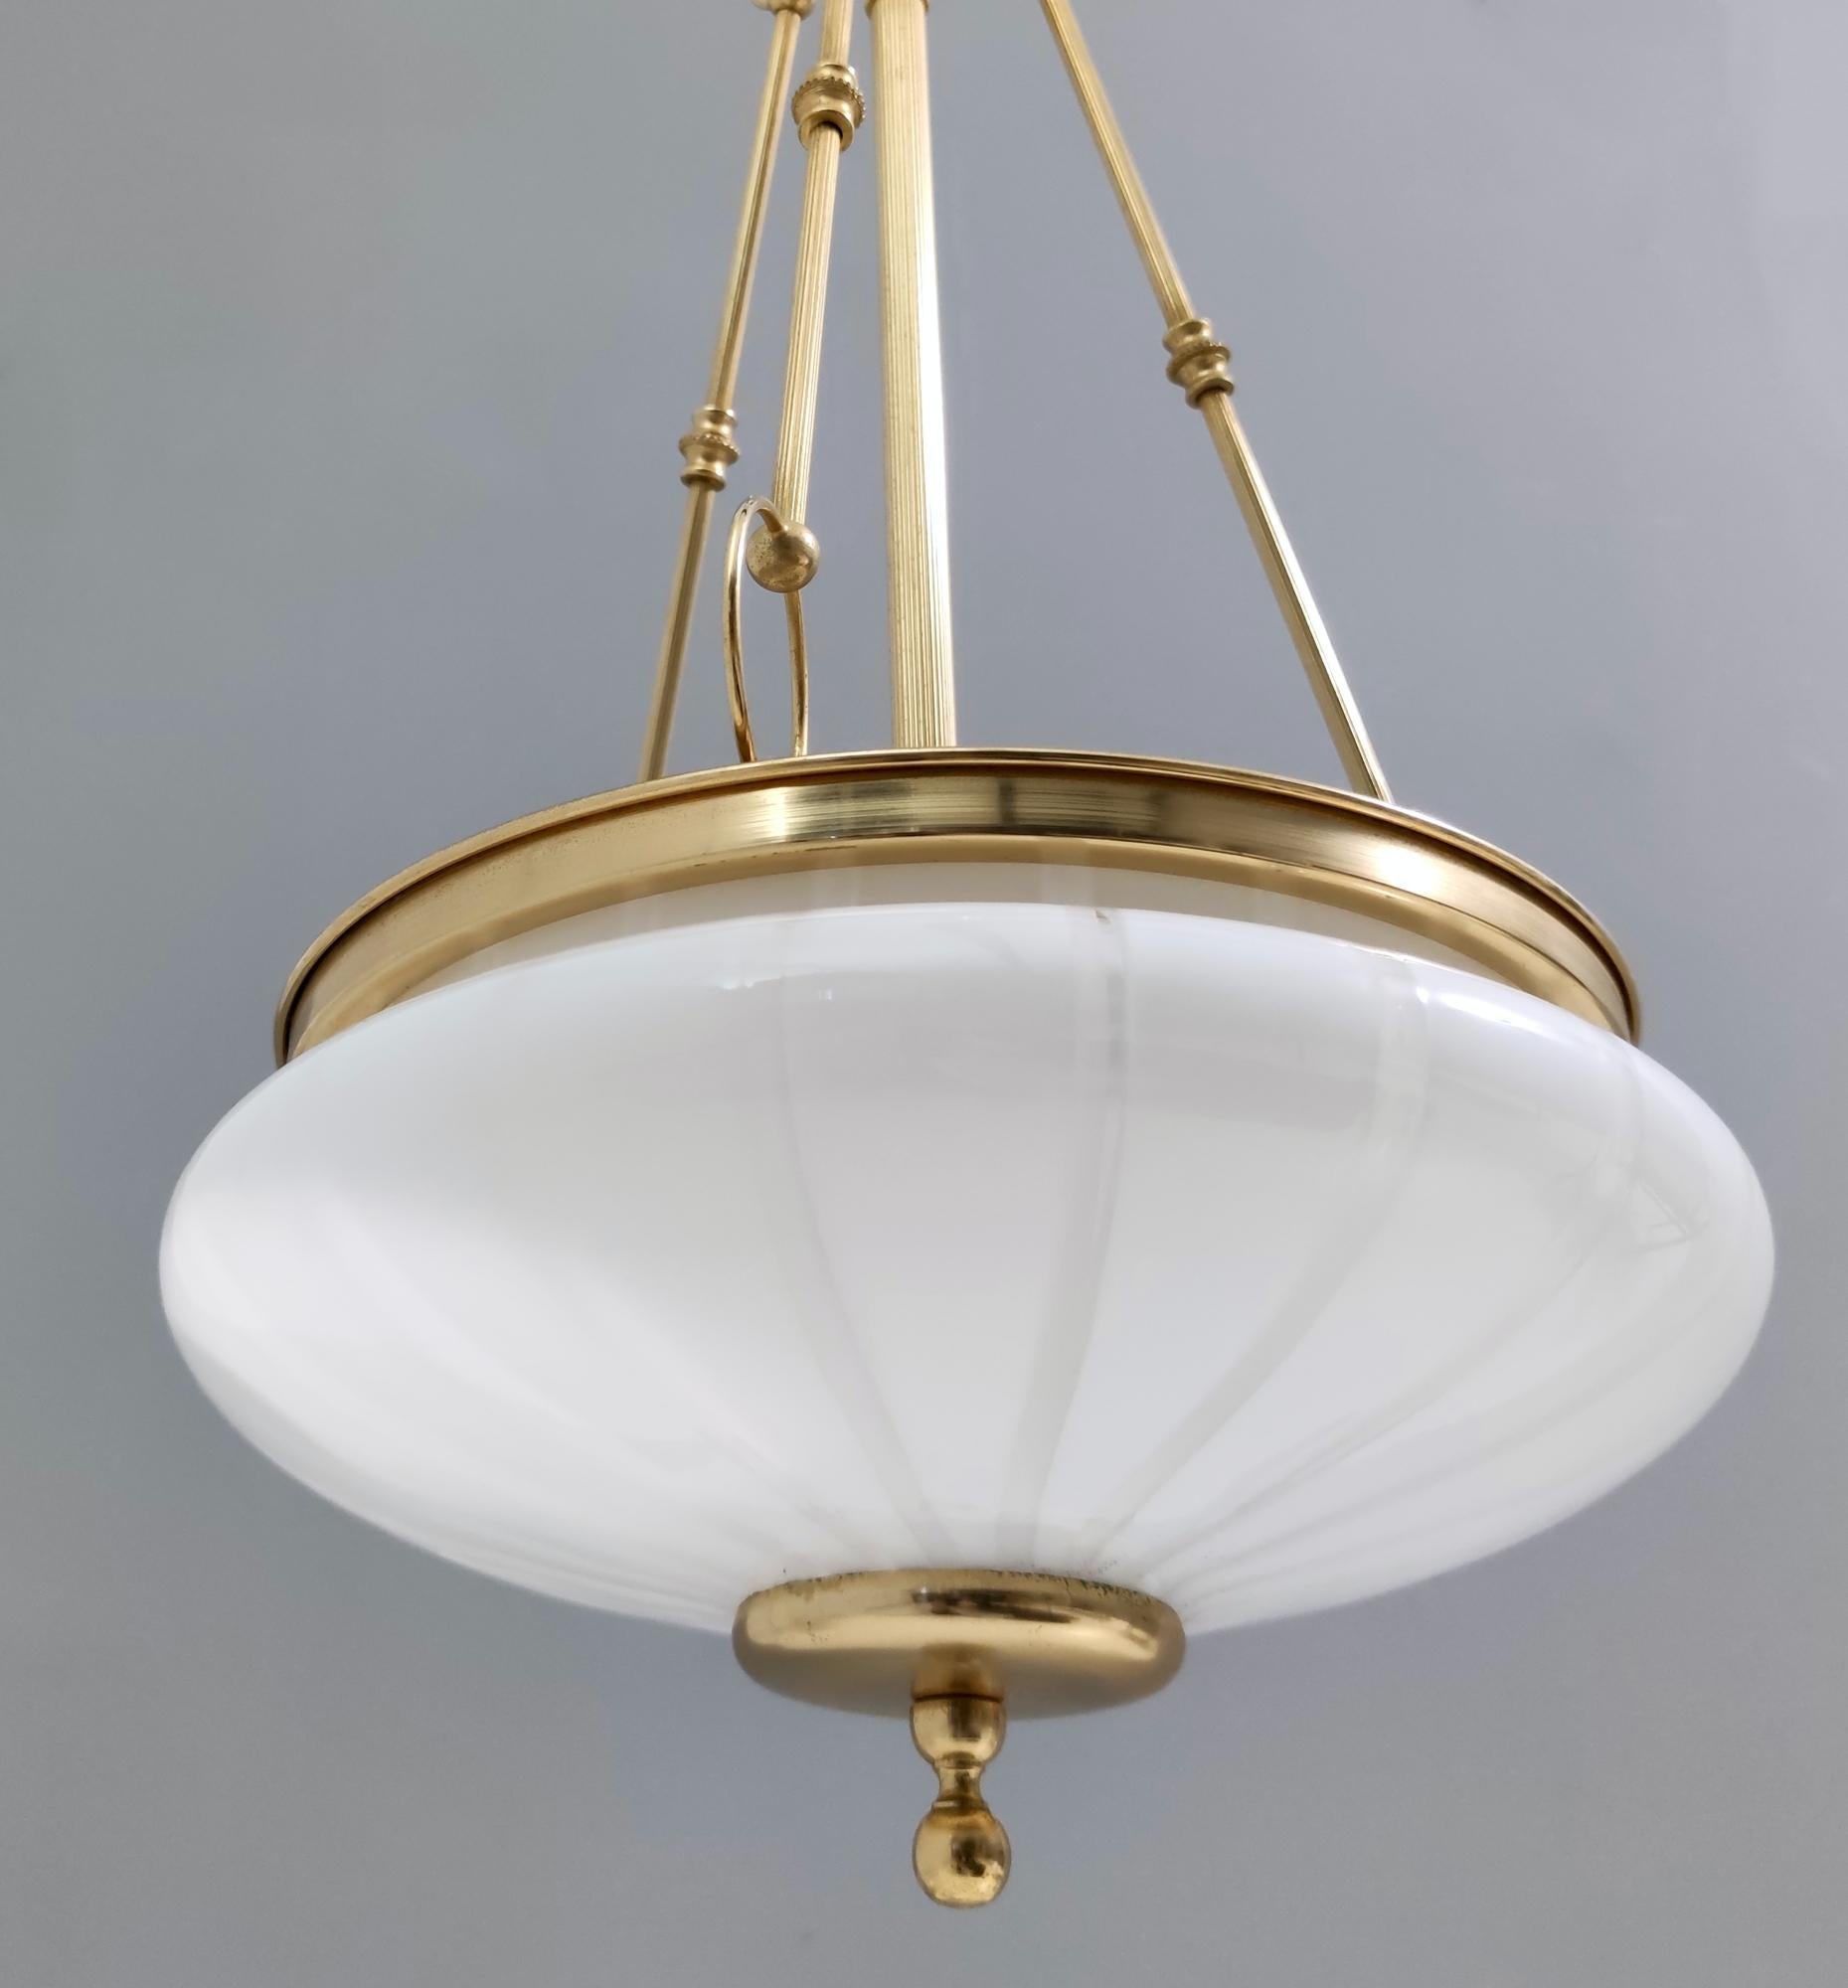 Mid-20th Century Vintage Murano Glass and Brass Ceiling Light in Neoclassical Style, Italy For Sale